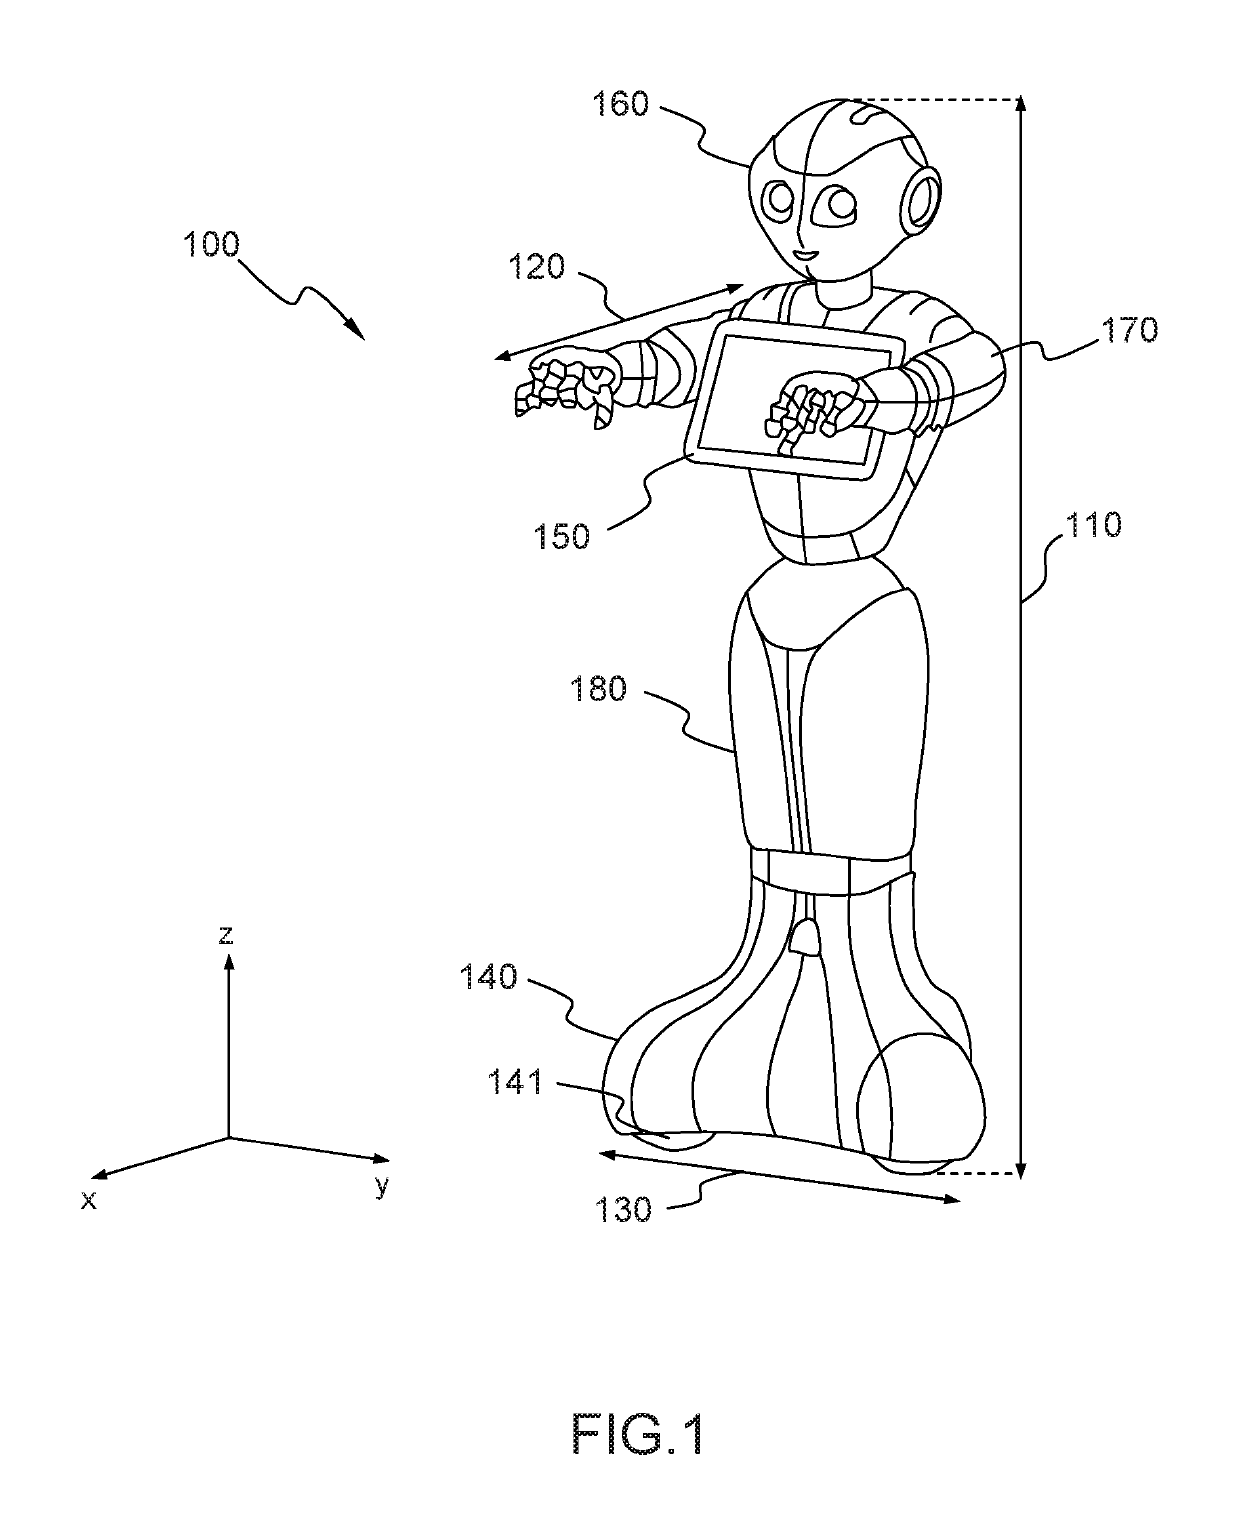 Omnidirectional wheeled humanoid robot based on a linear predictive position and velocity controller